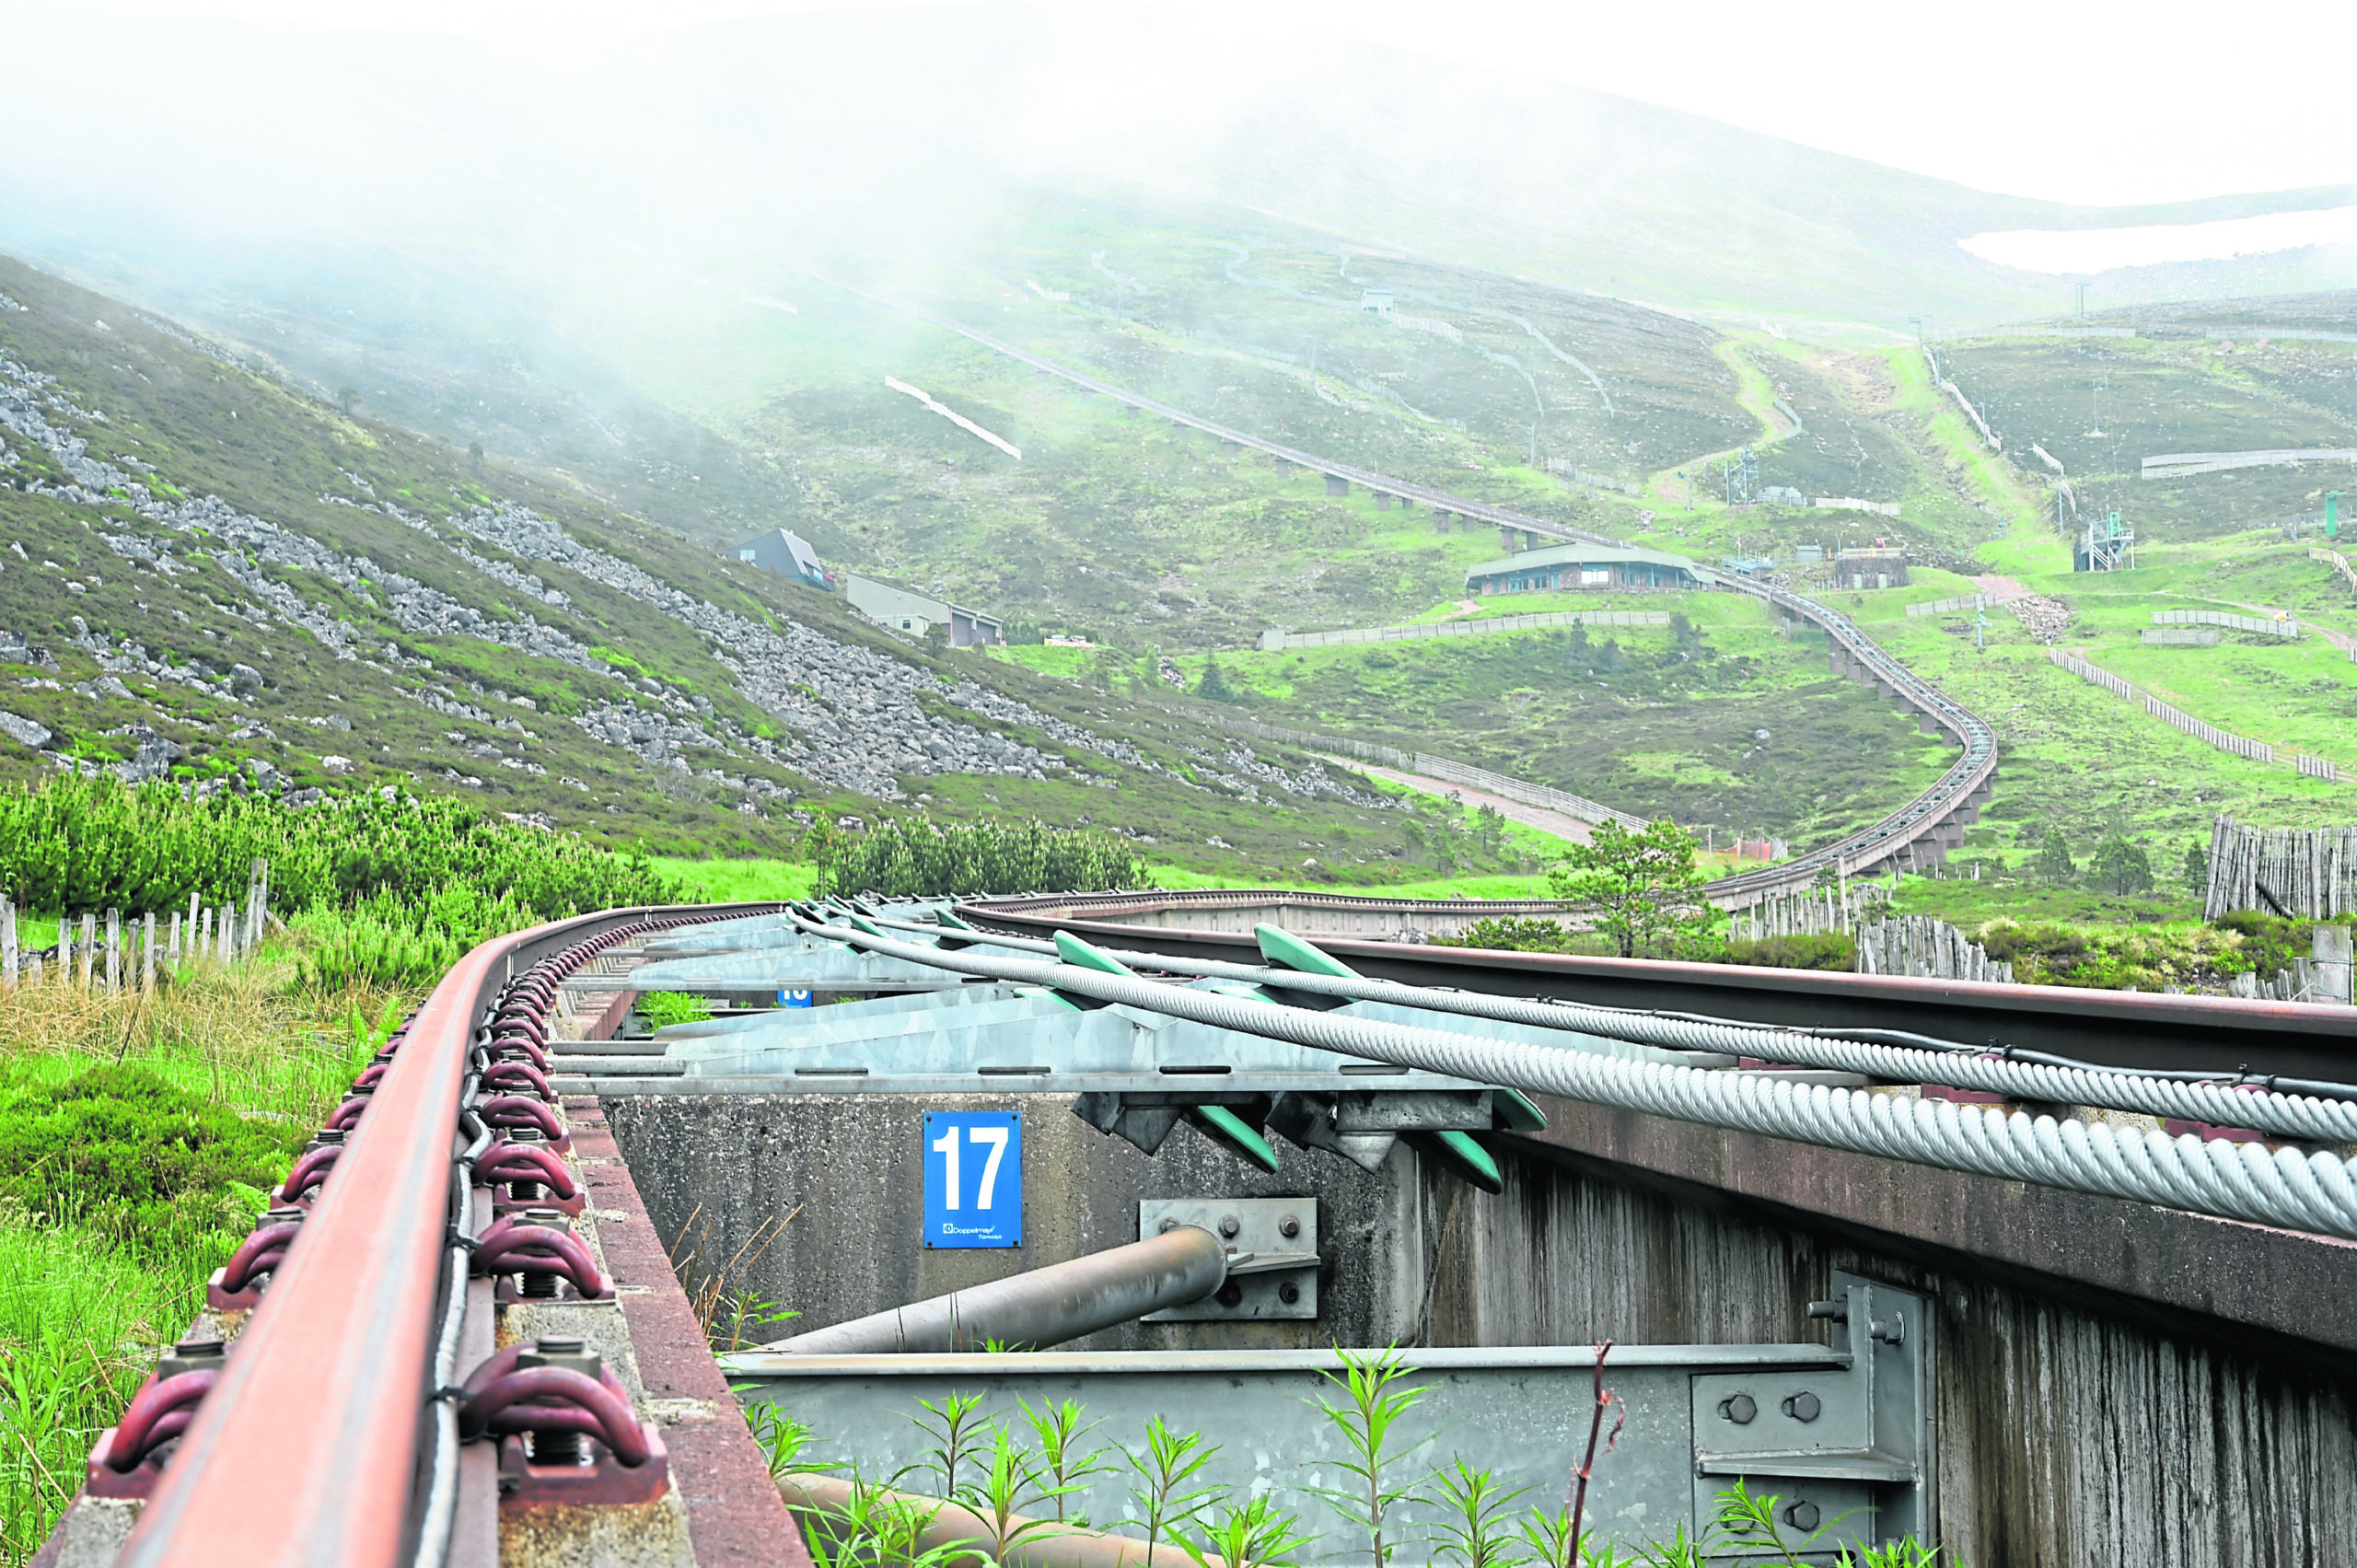 The Cairngorm ski area and funicular railway, repair work on which is still causing concern.